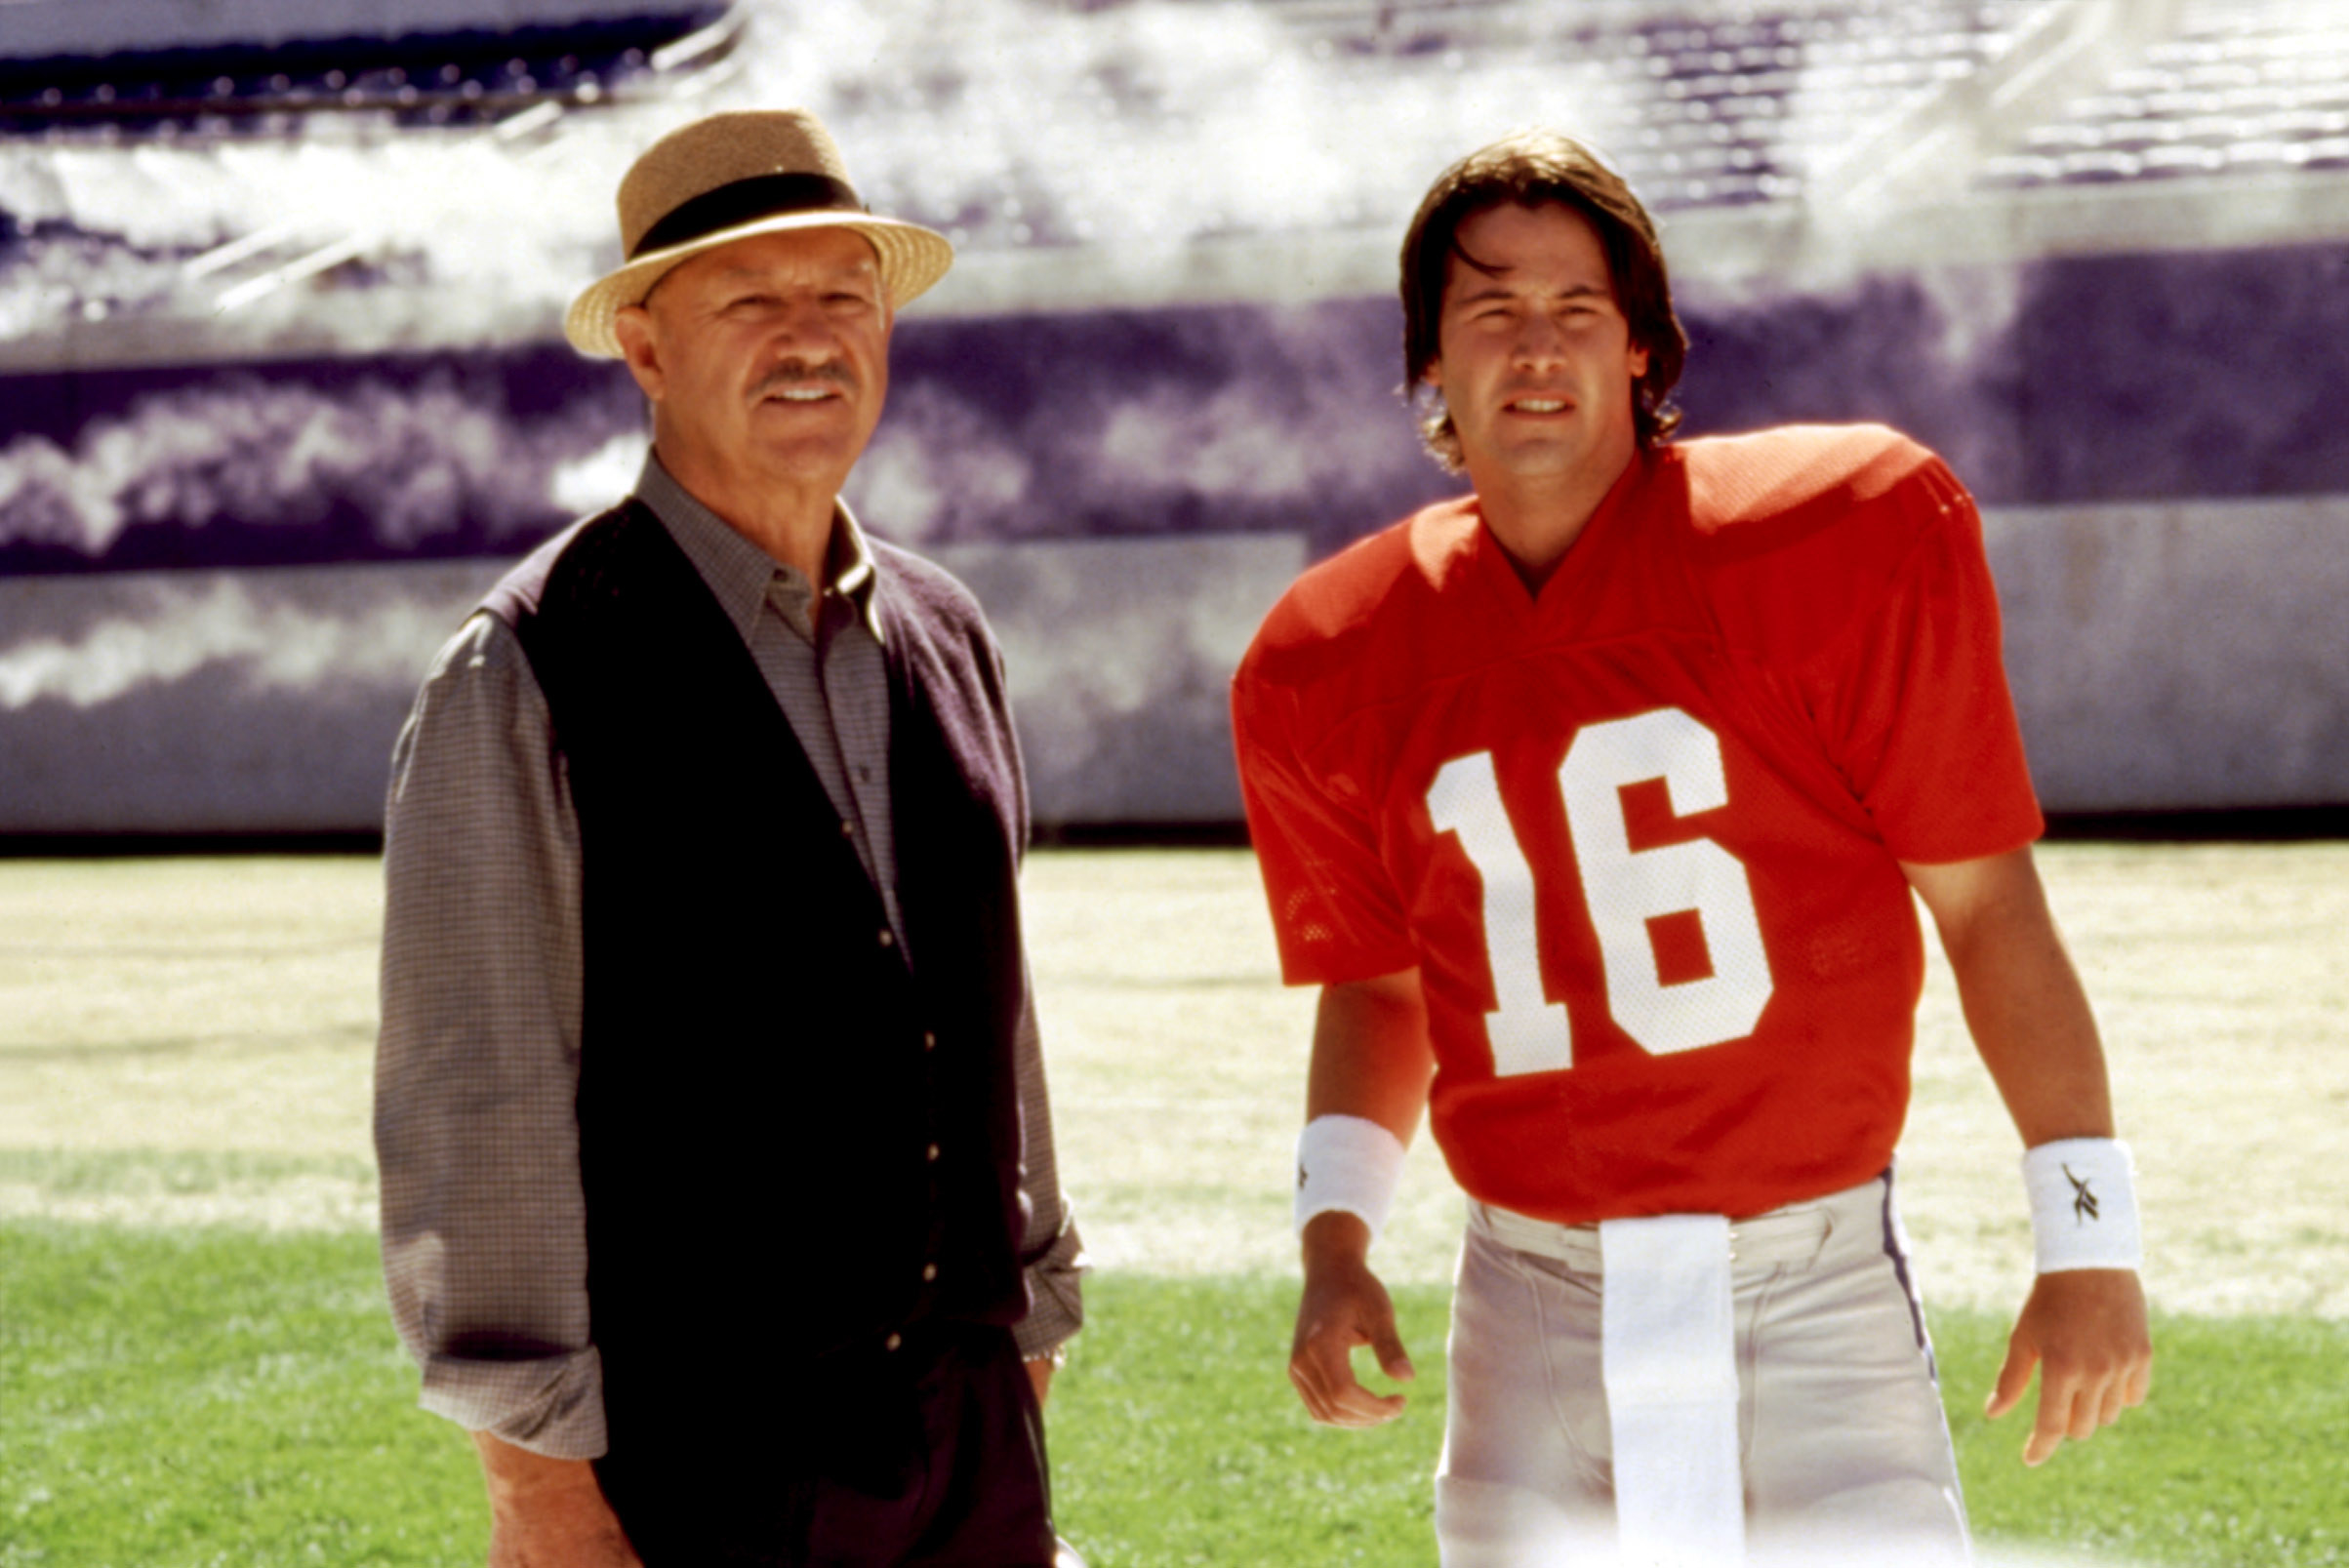 Gene standing with Keanu, who&#x27;s wearing a football uniform